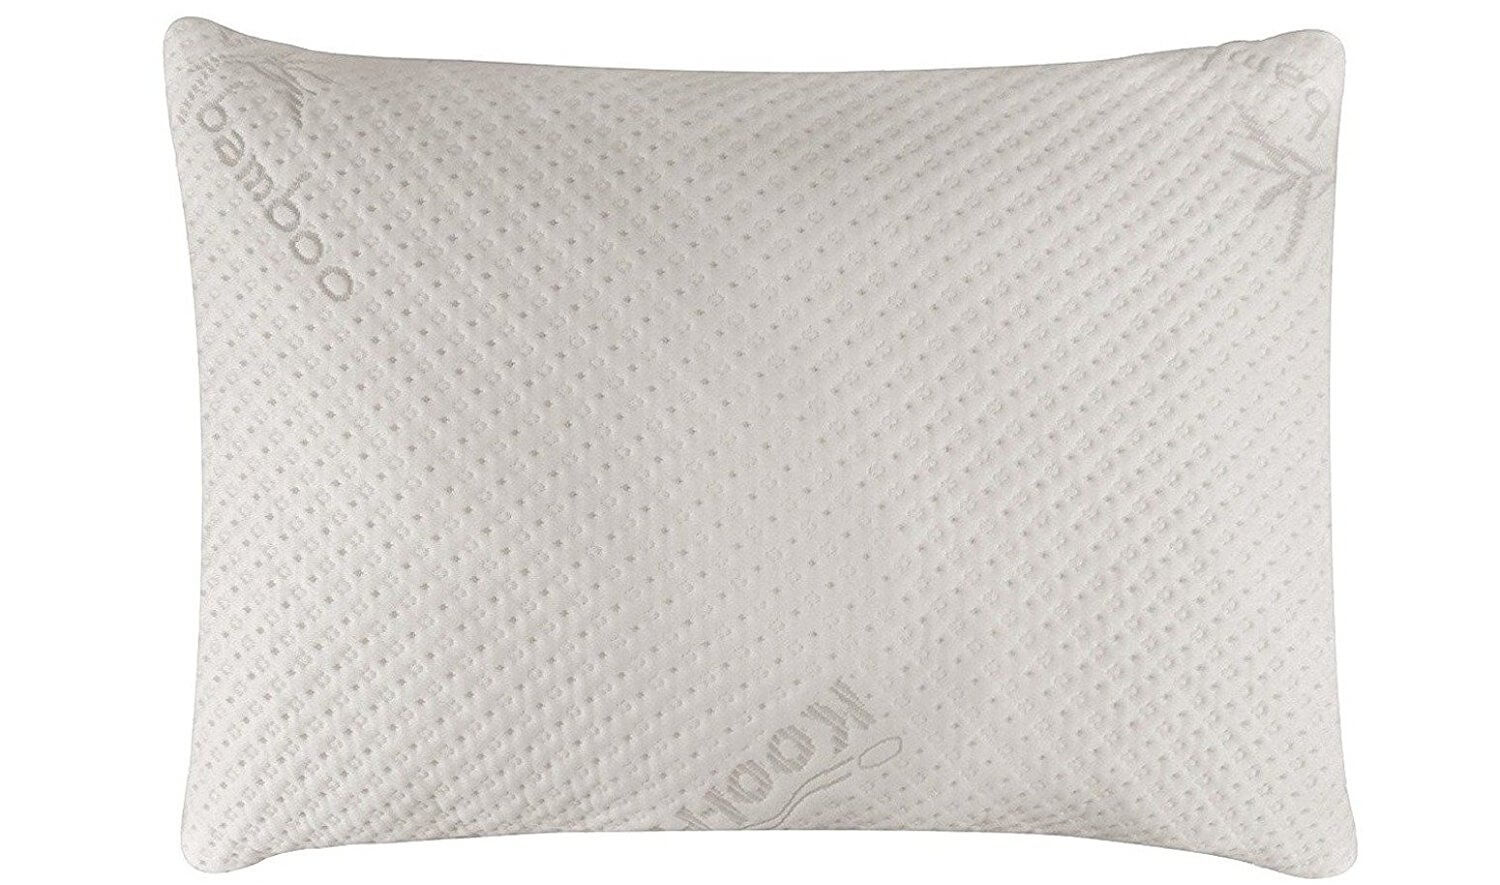 Pillow by Snuggle-Pedic